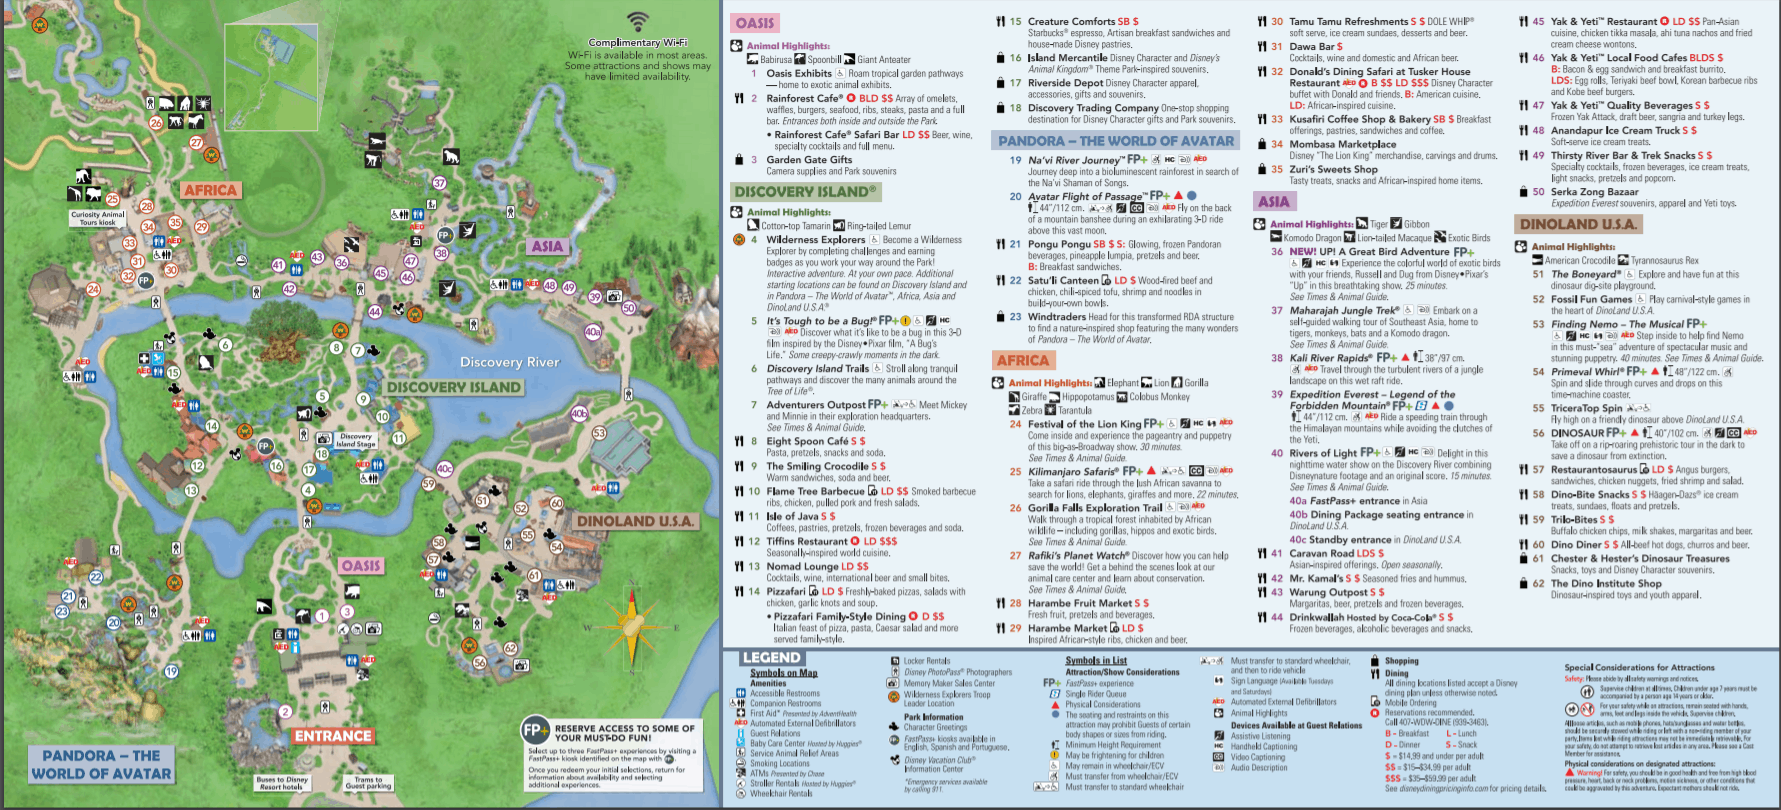 Complete Guide to Animal Kingdom at Disney World WDW Prep School